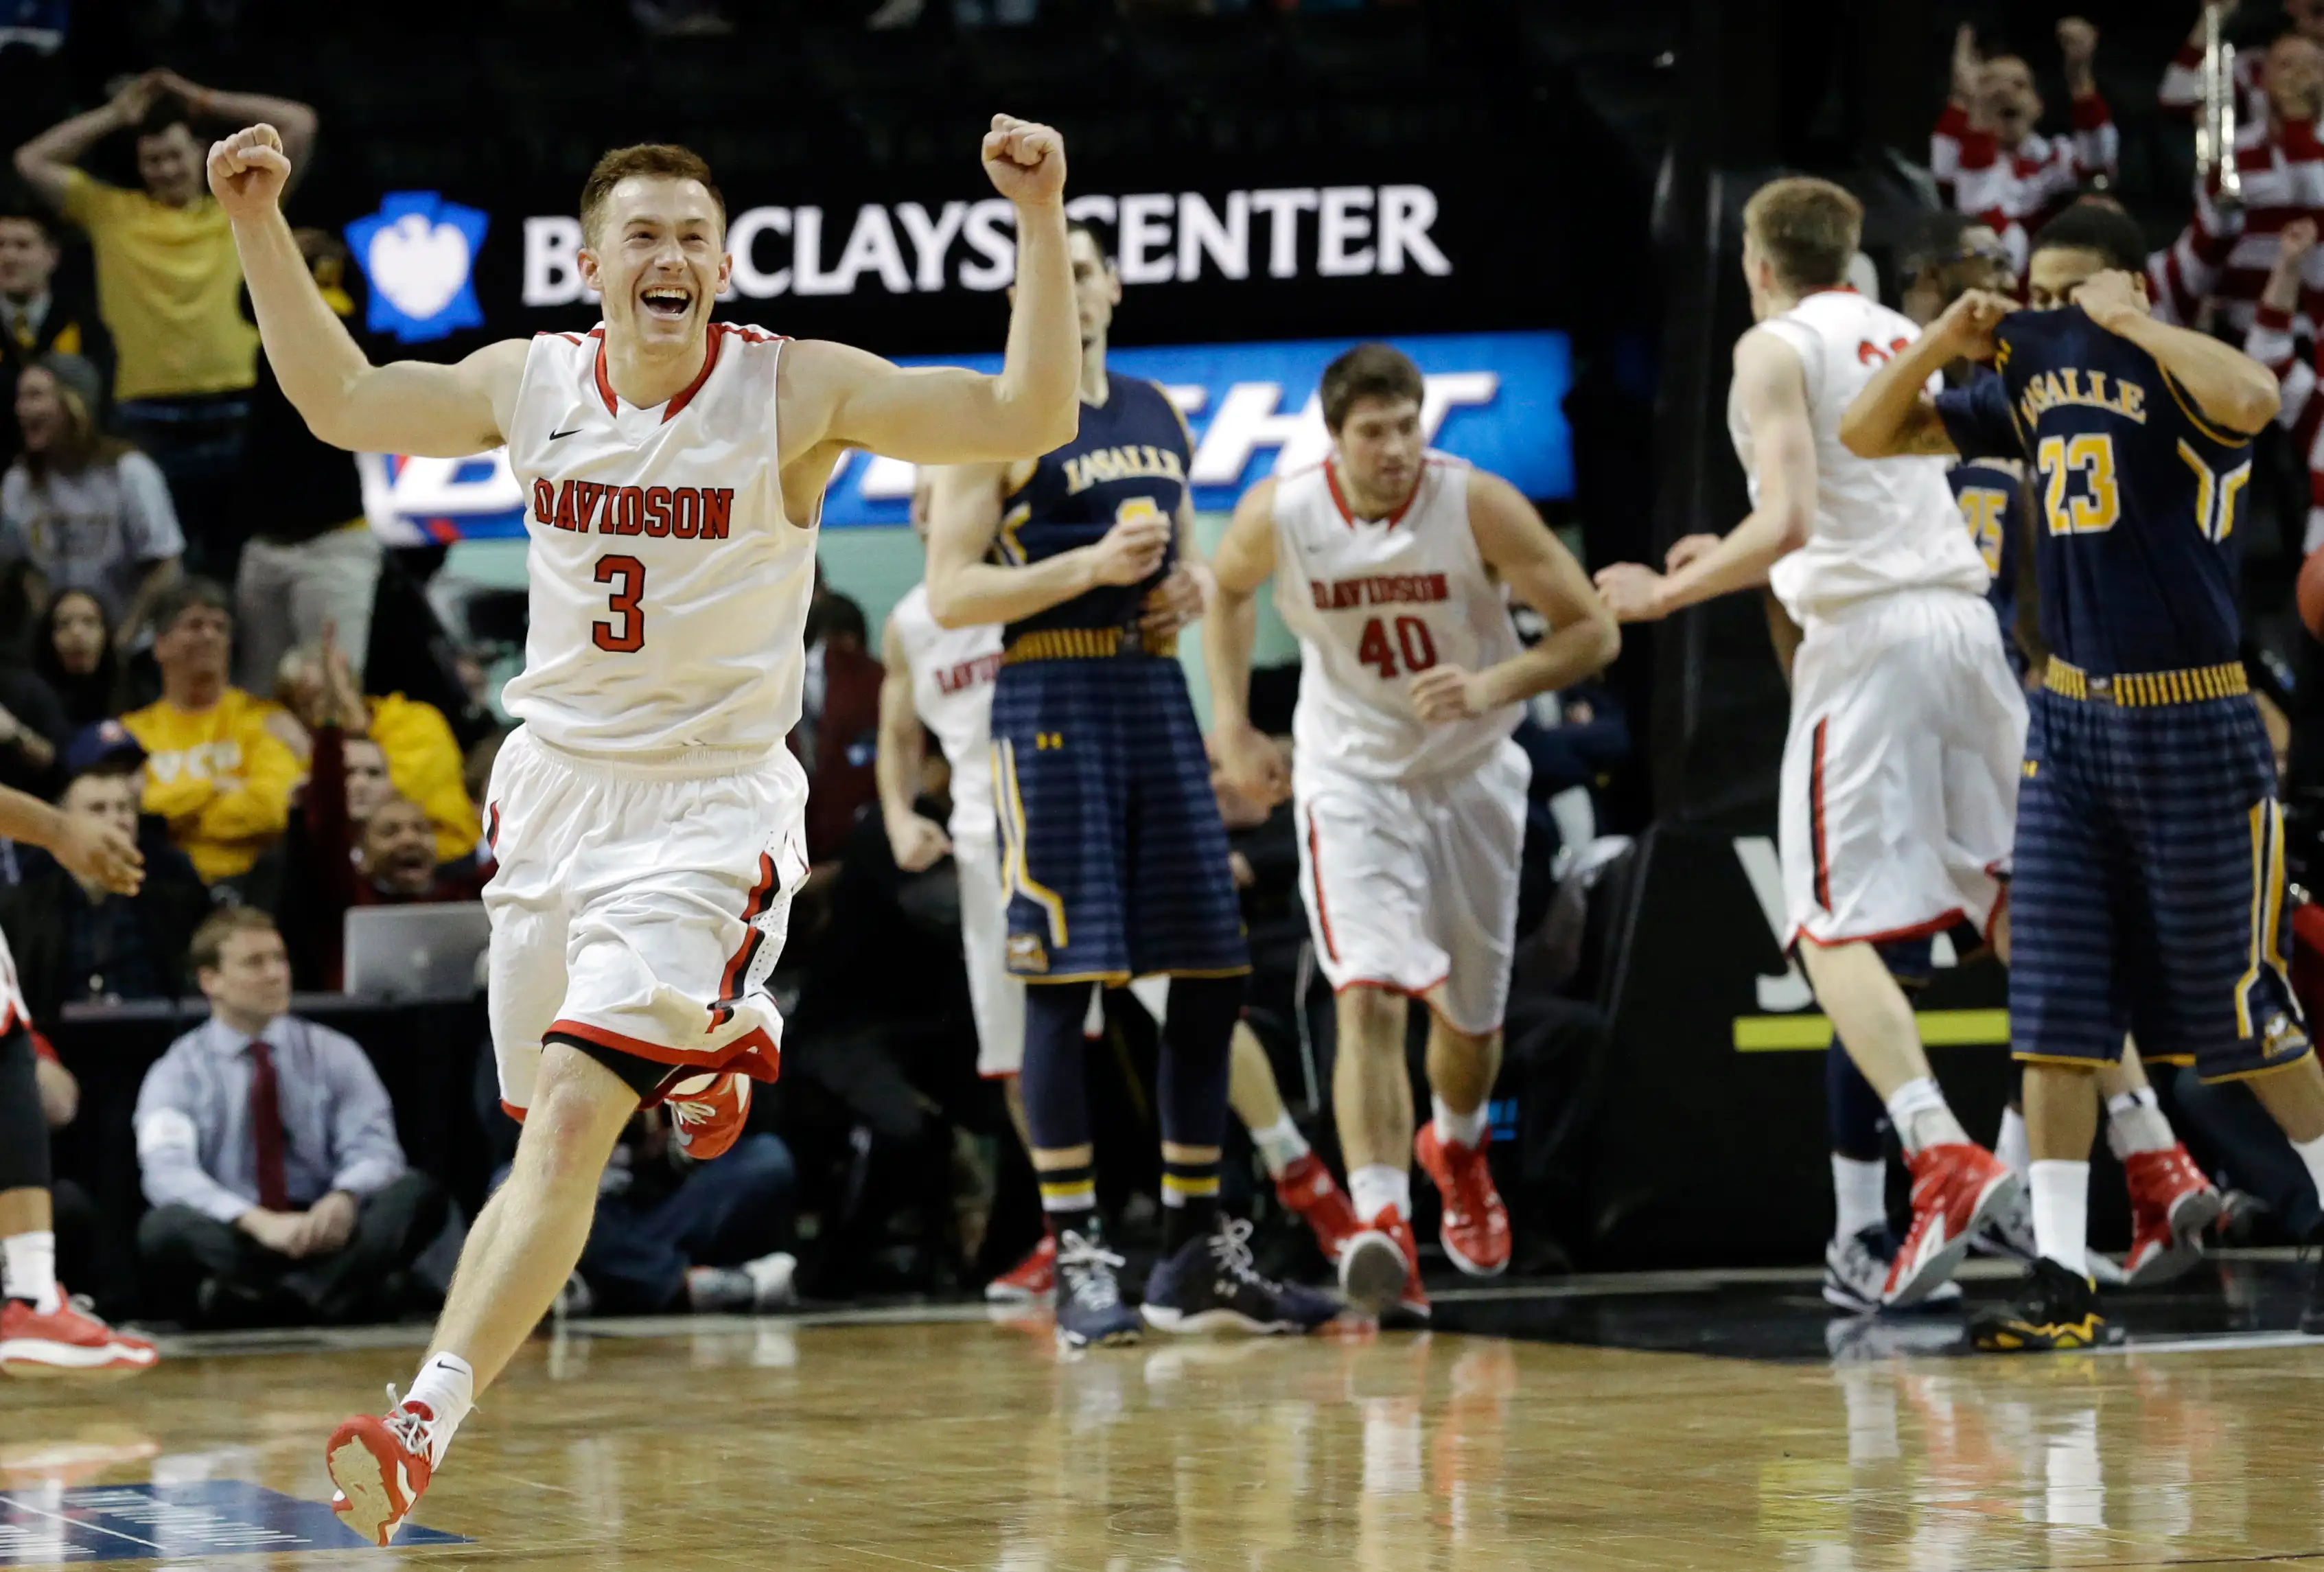 Davidson guard Brian Sullivan (3) celebrates after their 67-66 win over La Salle in an NCAA college basketball game in the quarterfinals of the Atlantic 10 Conference tournament in New York, Friday, March 13, 2015.